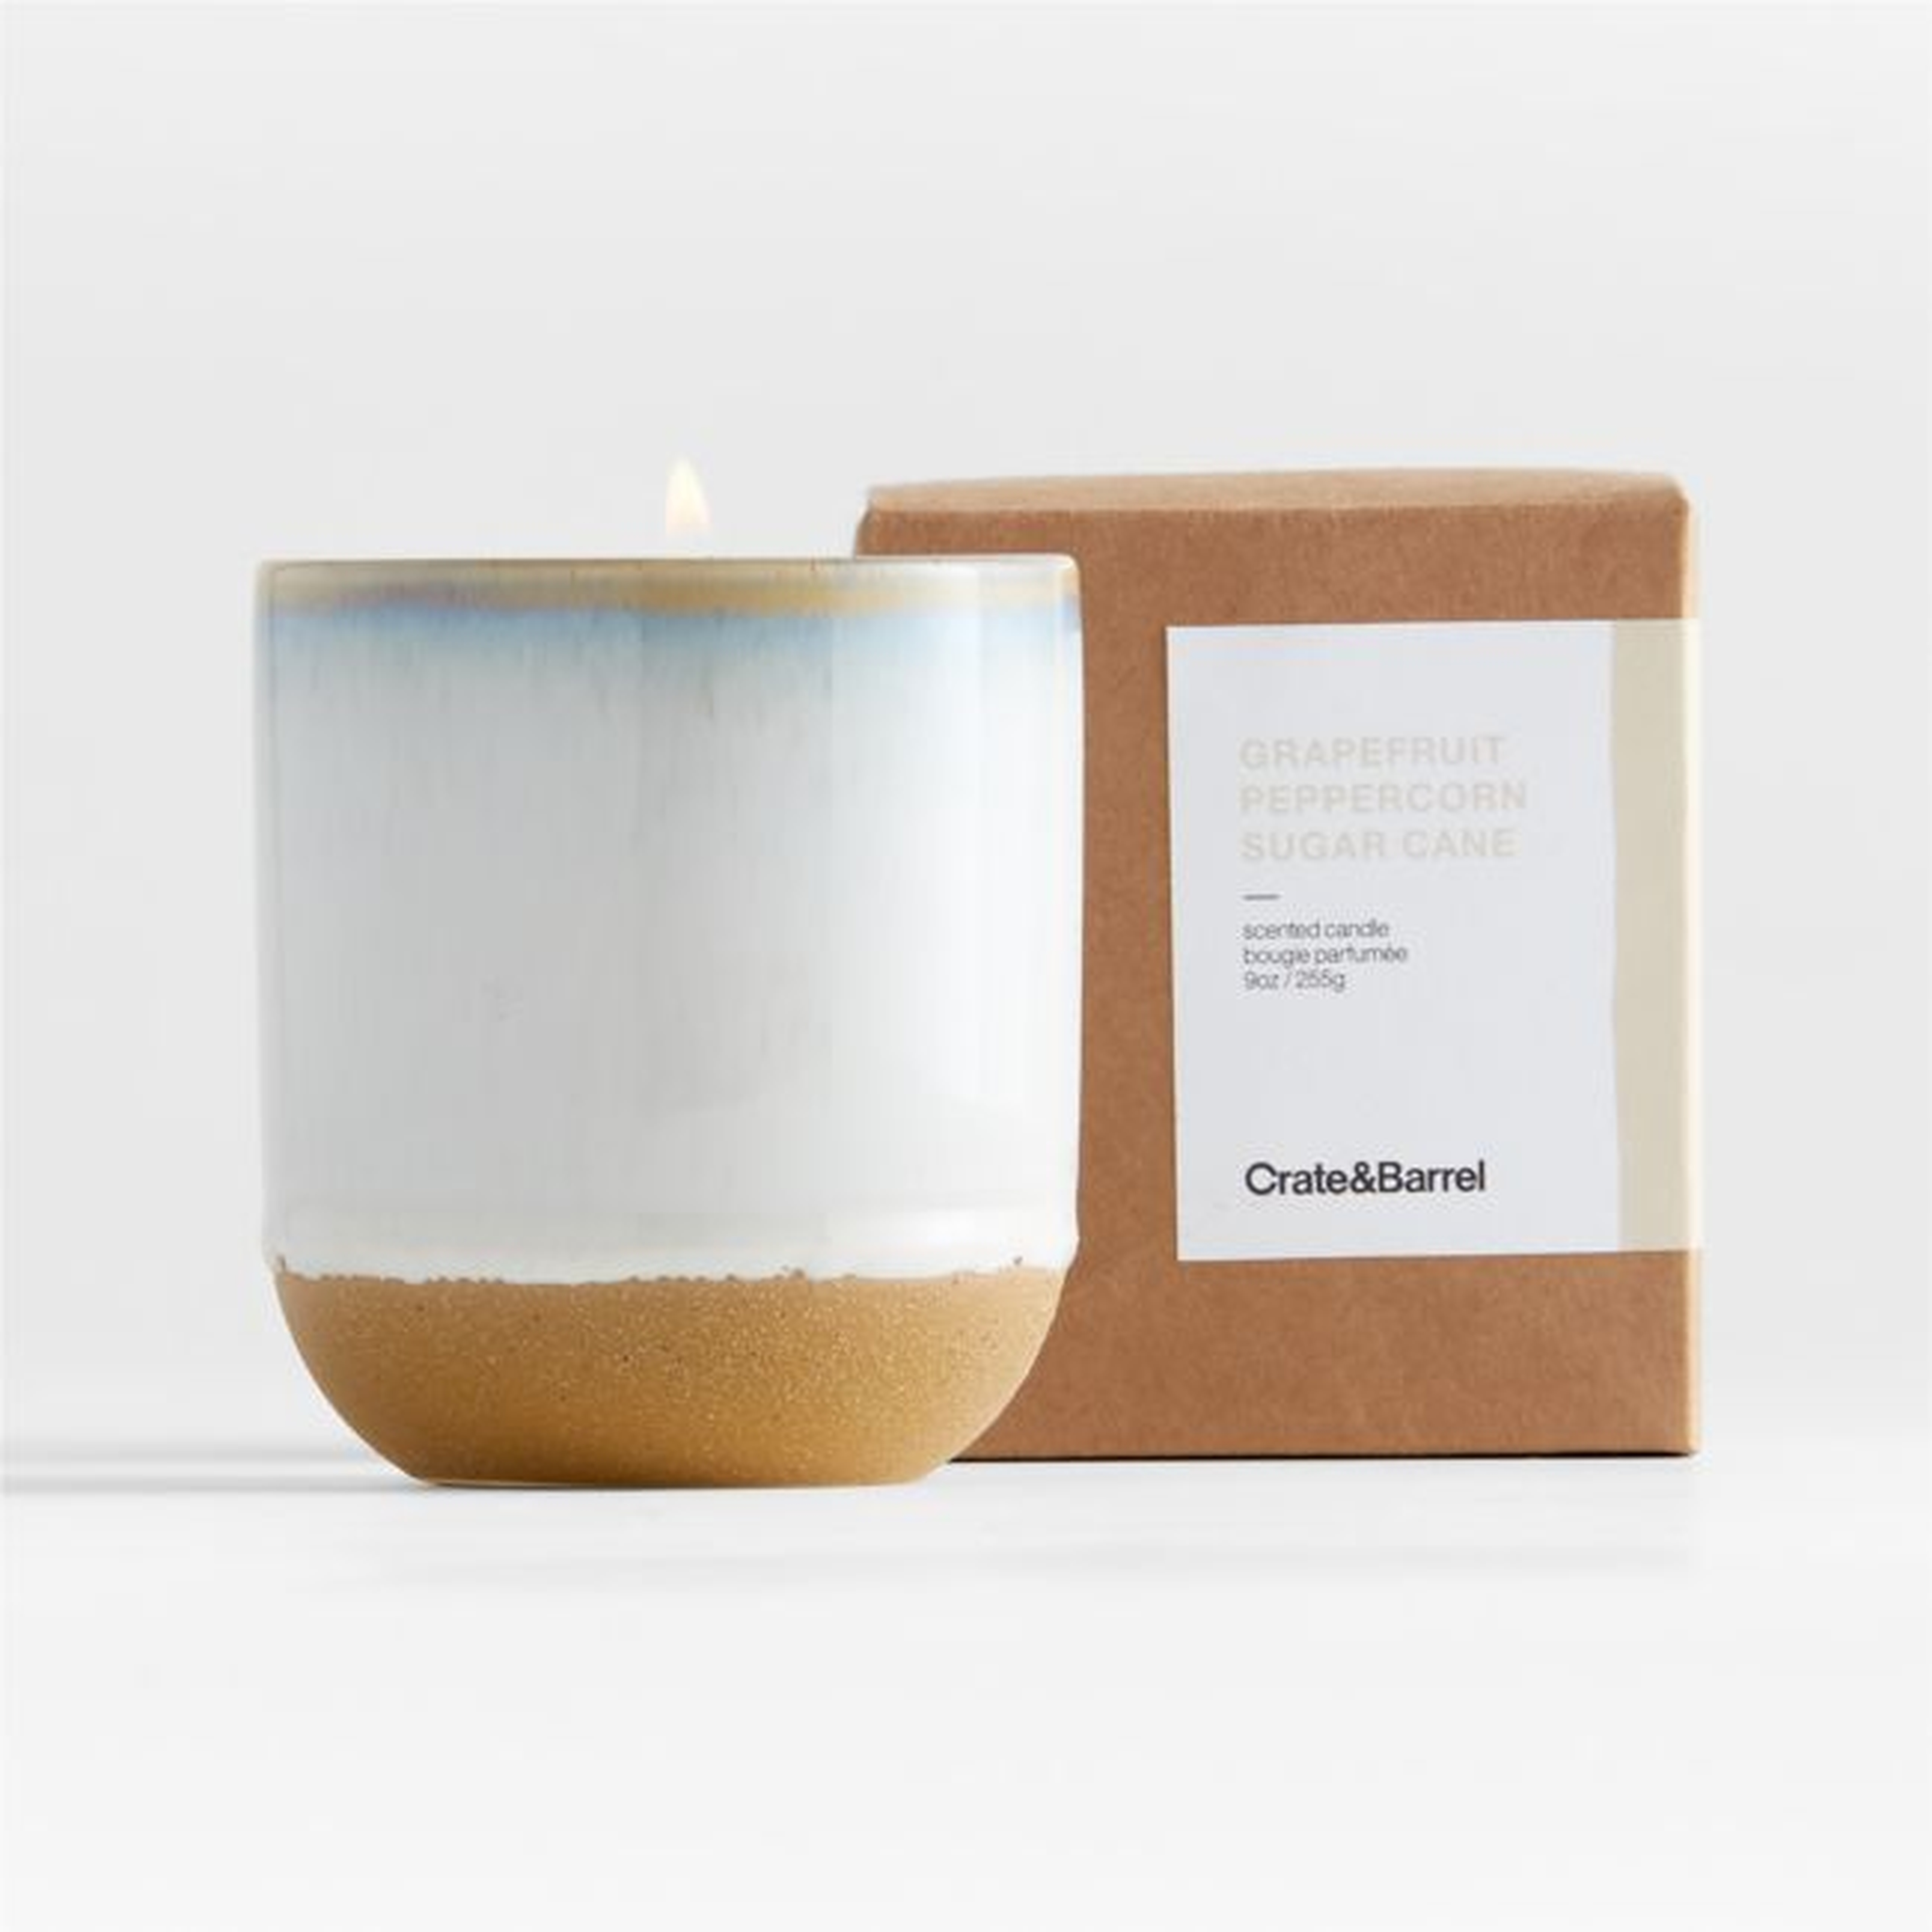 Grapefruit, Peppercorn, Sugarcane Scented Candle - Crate and Barrel